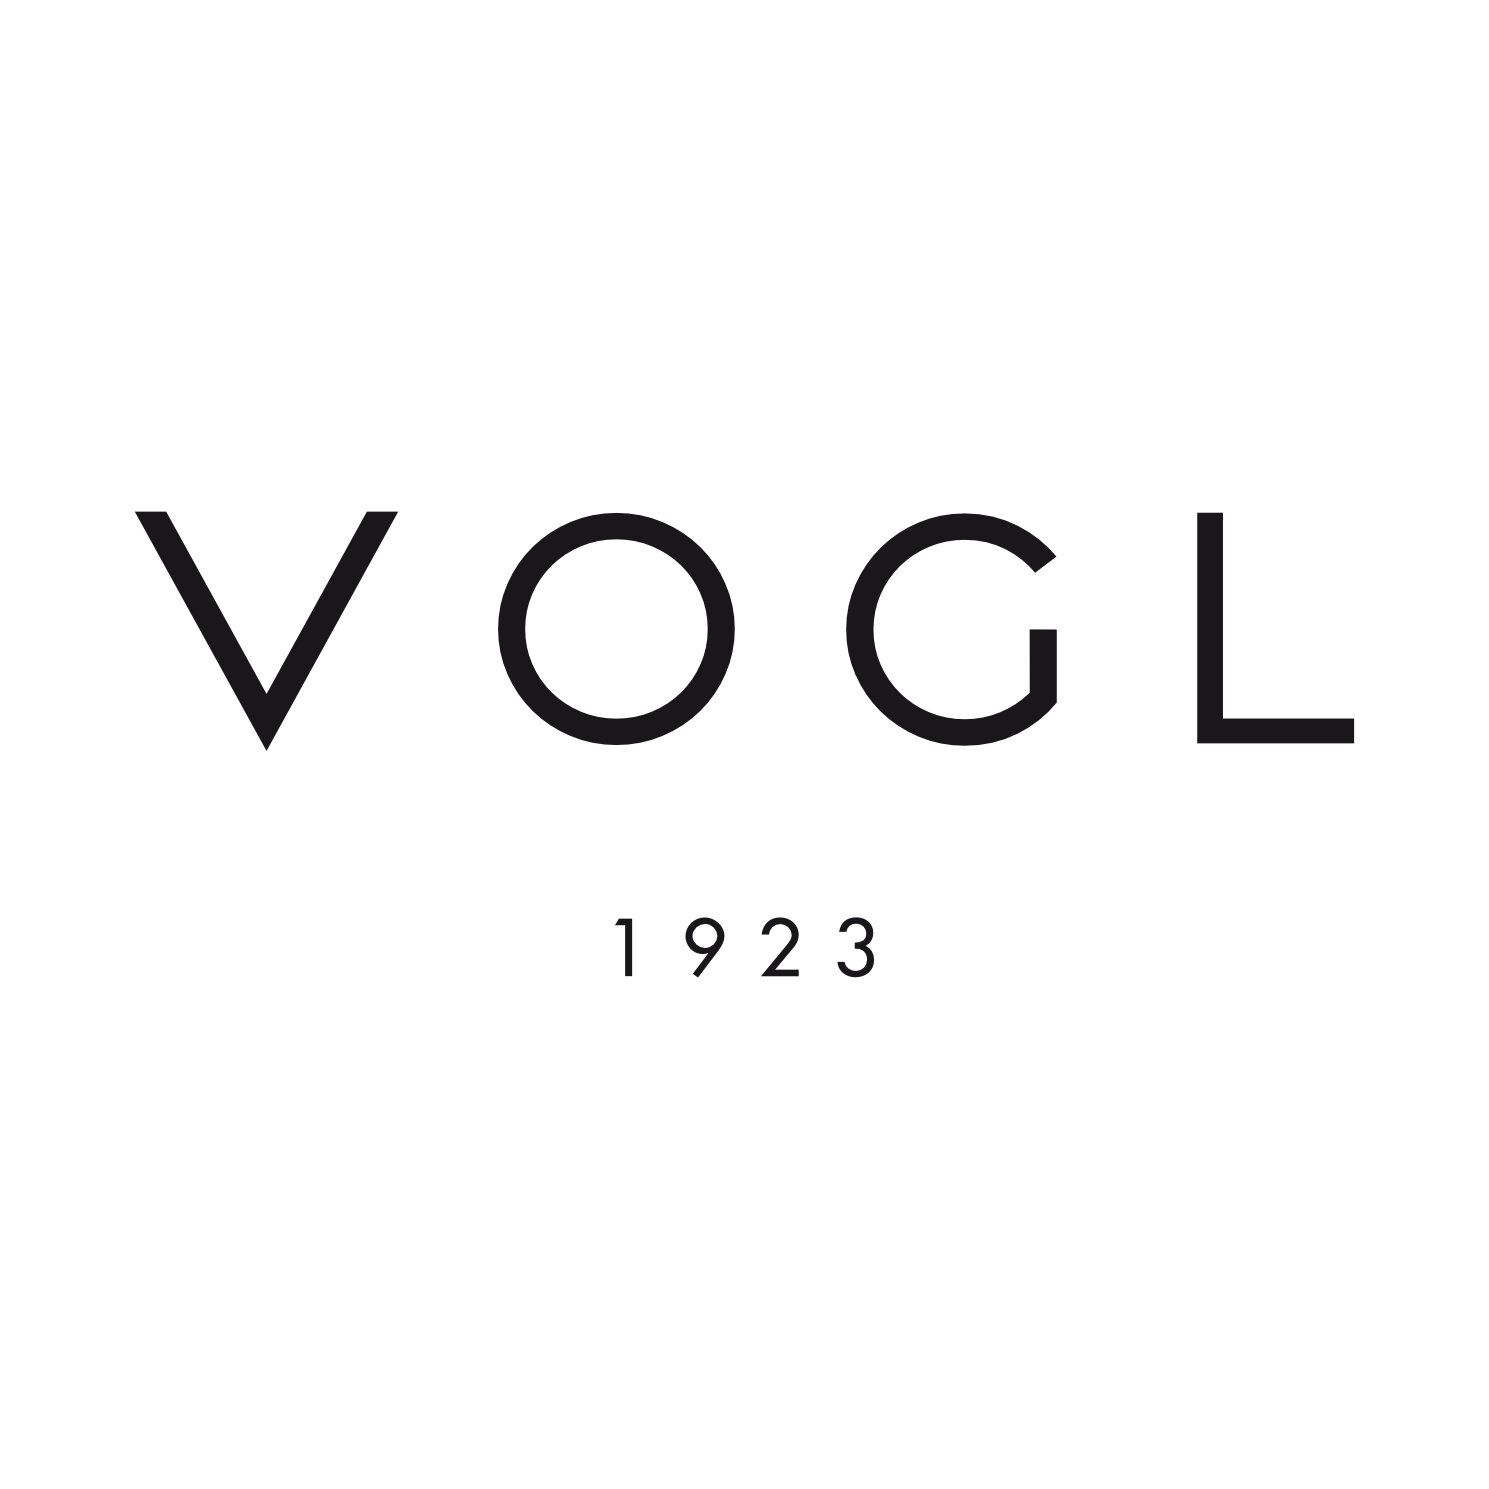 Vogl 1923" - a stylized text logo of a jeweller from  Aschaffenburg with a vintage year.